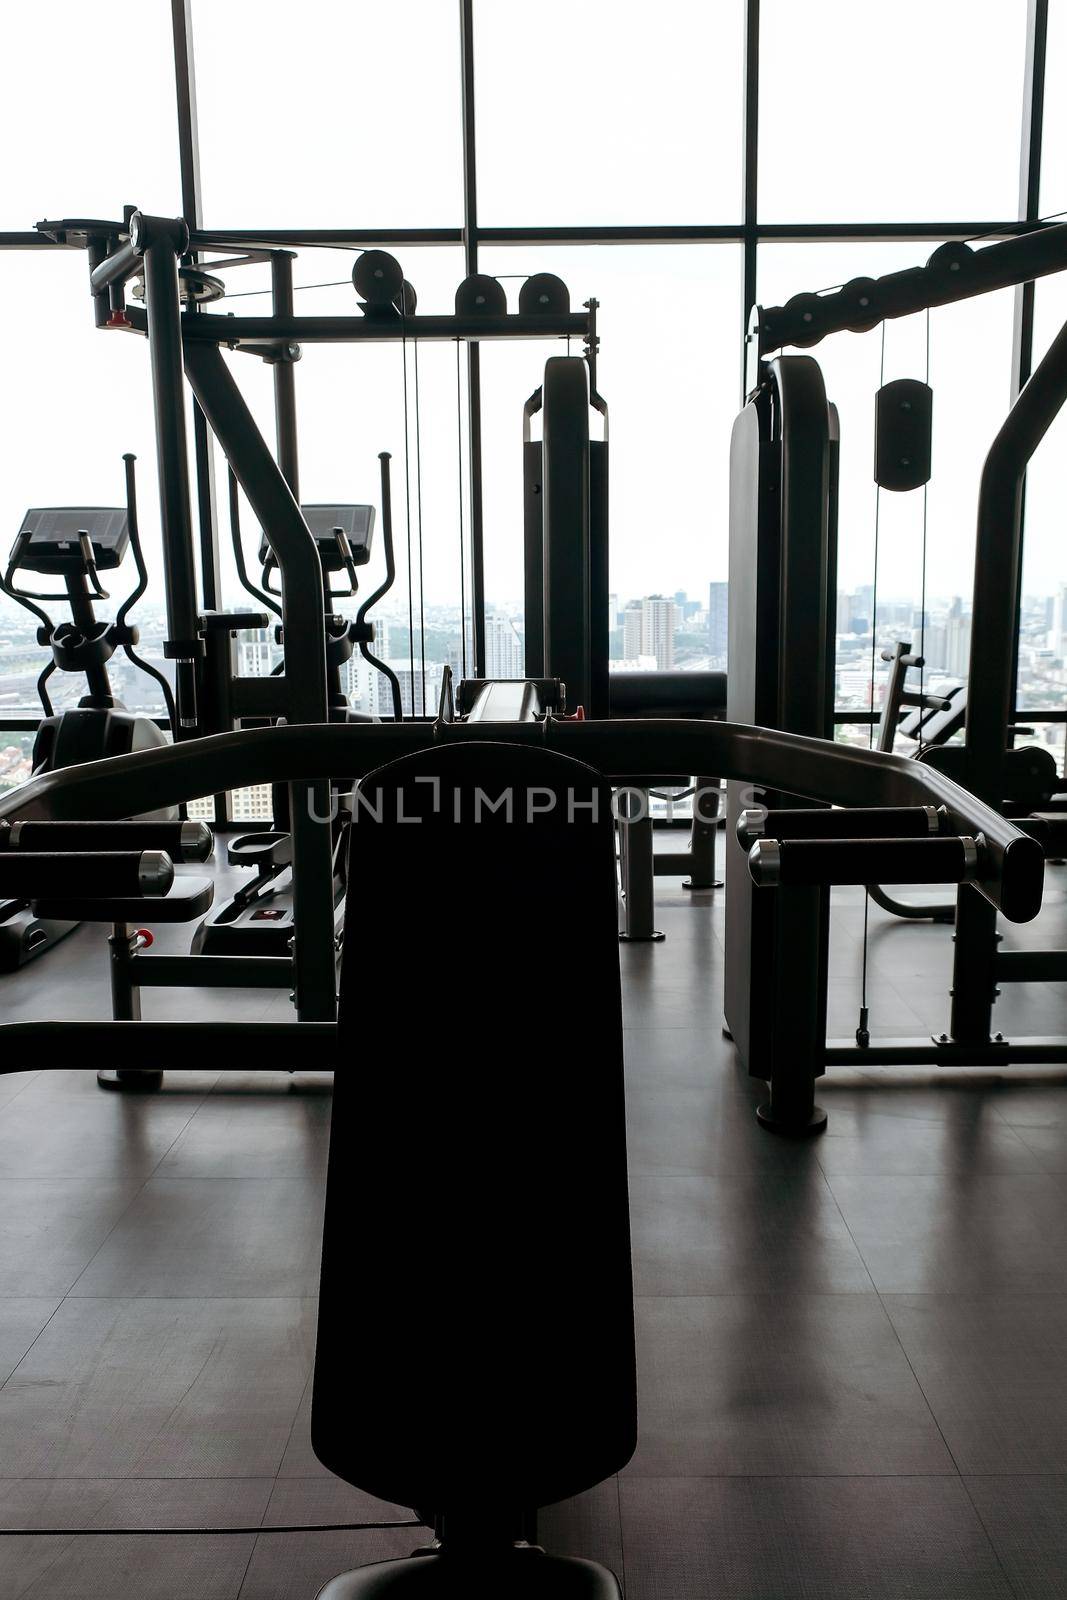 exercise machines in an empty gym by ponsulak